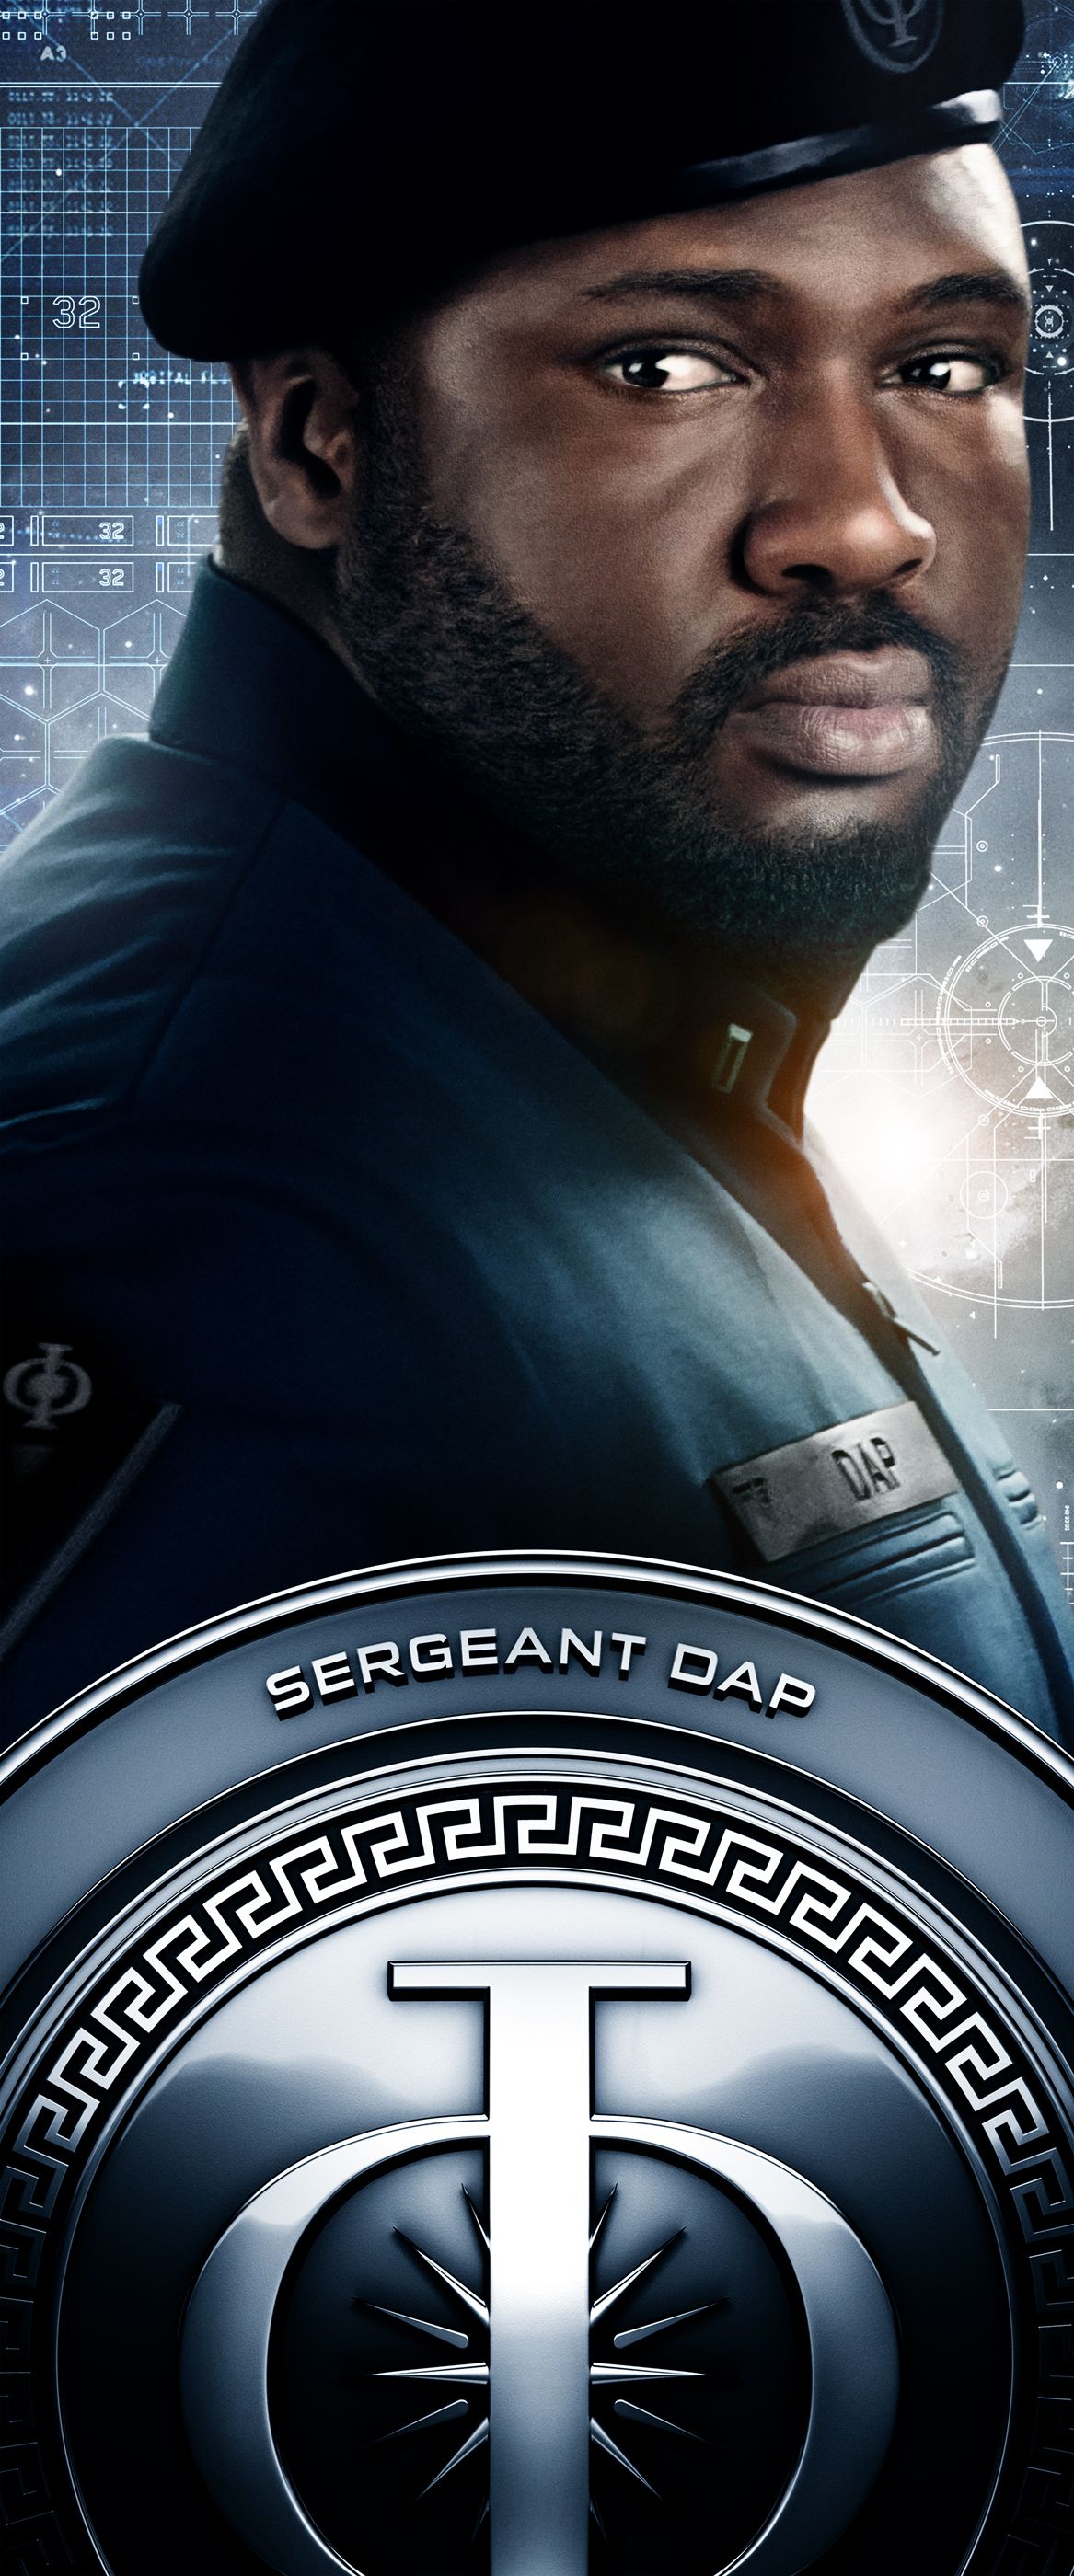 Ender's Game Nonso Anozie Character Poster